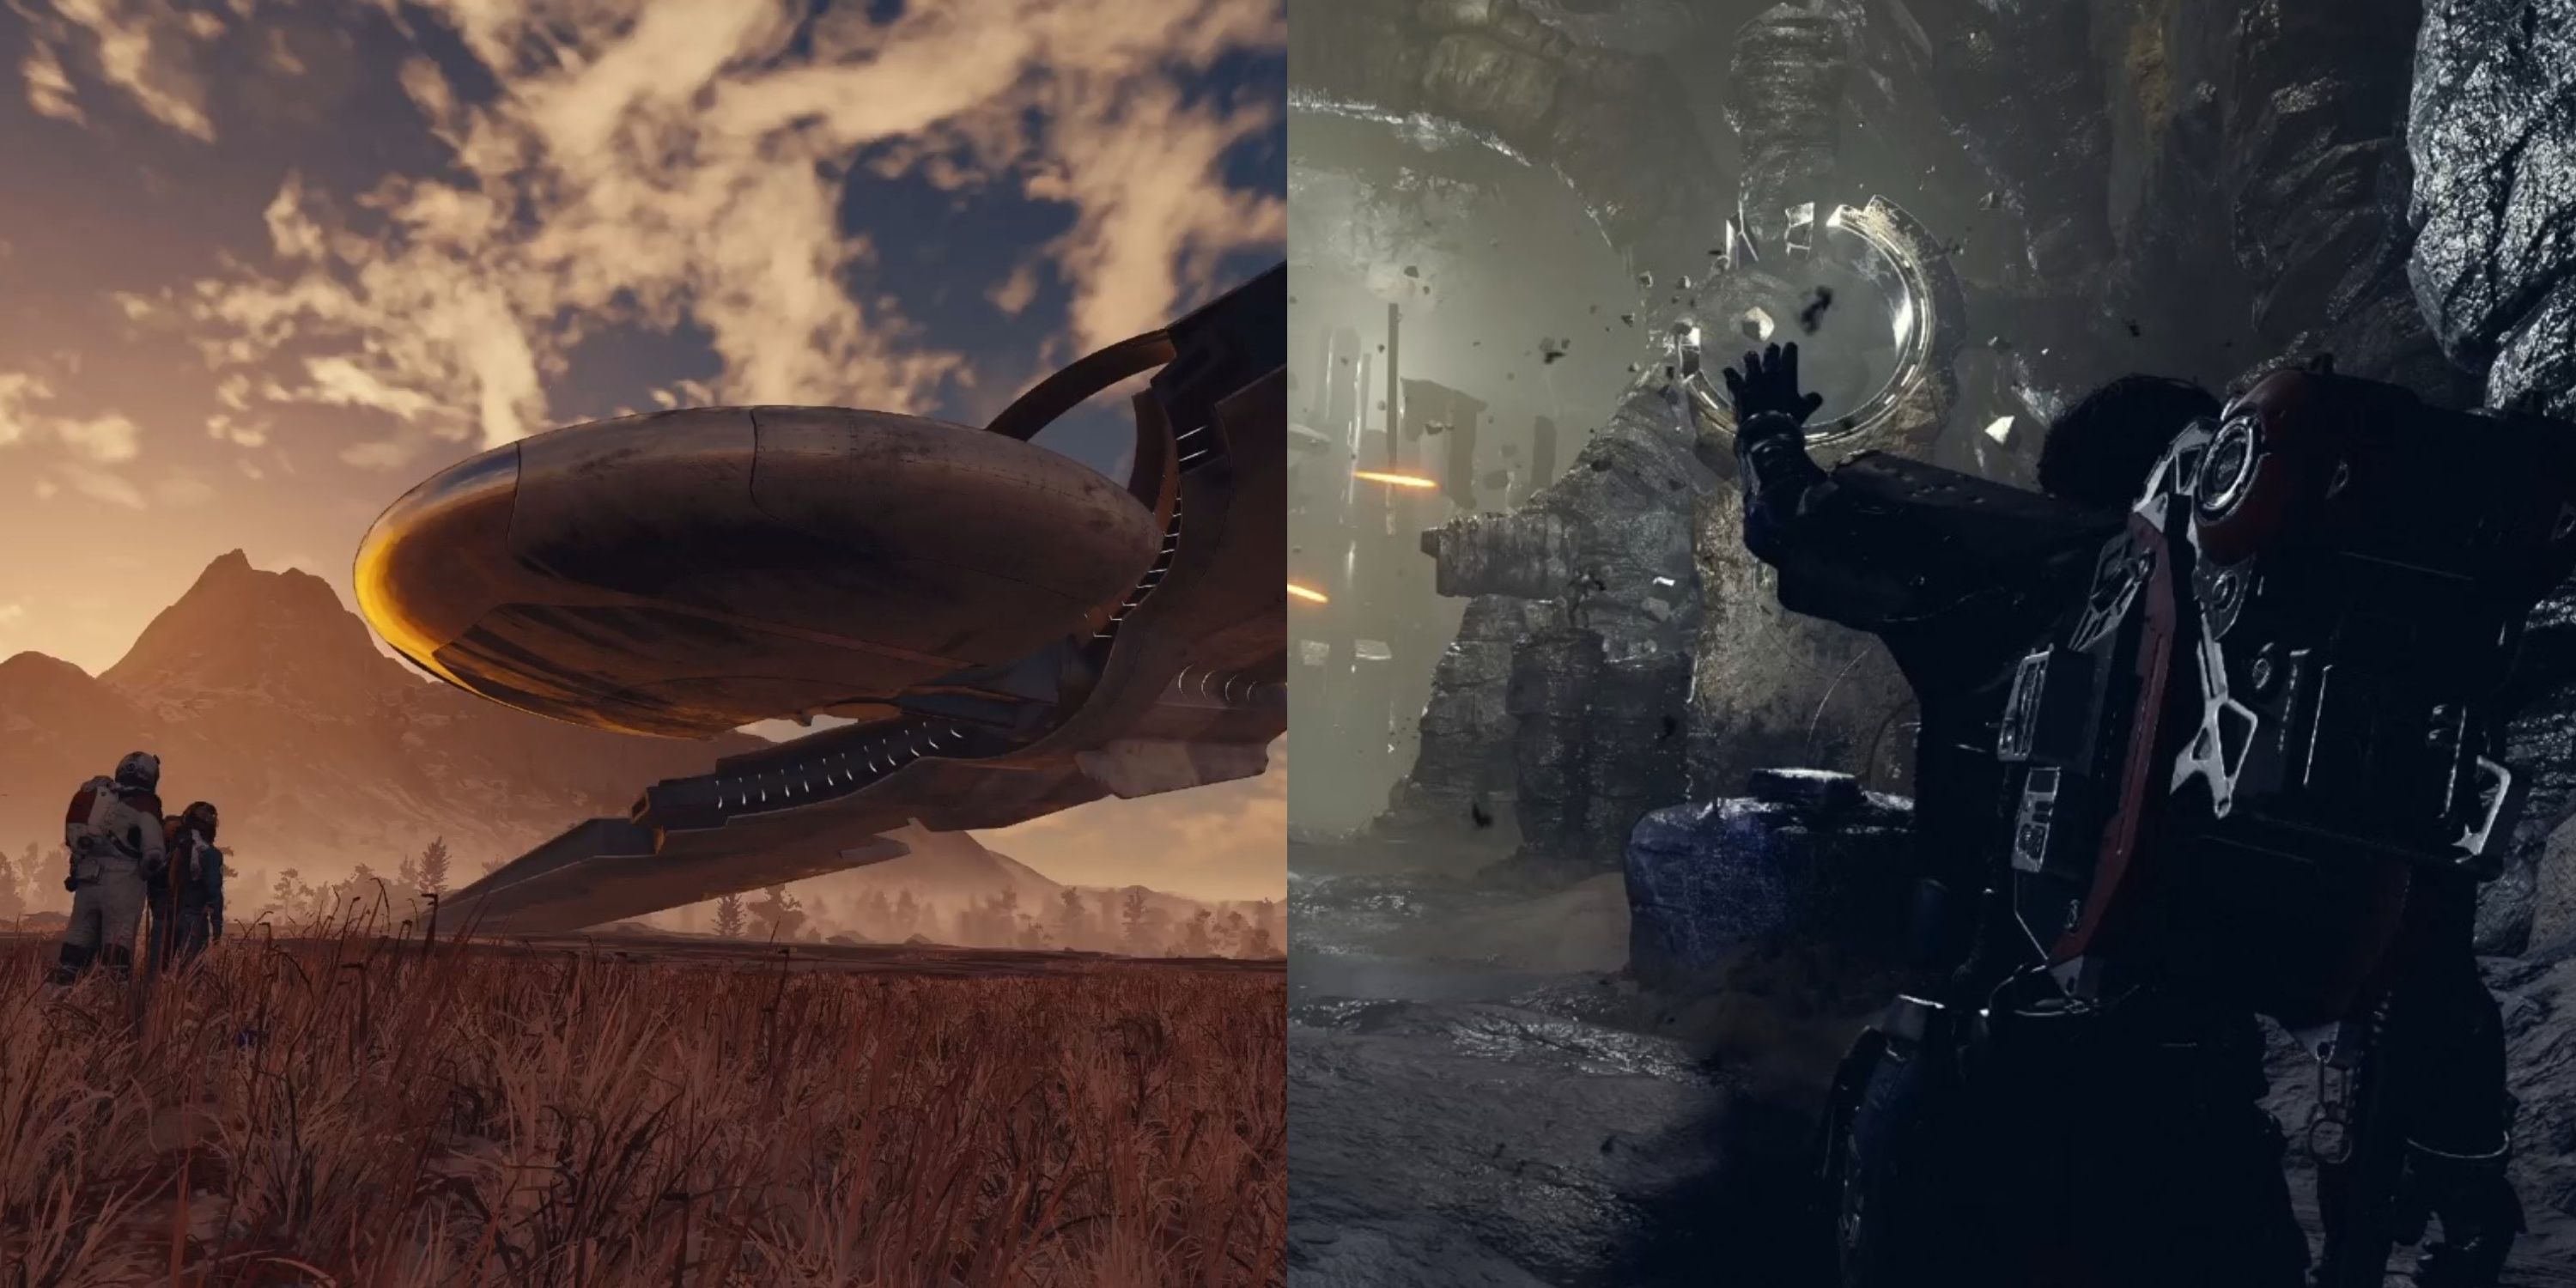 Two images depicting the player character in Bethesda Softwork's Starfield